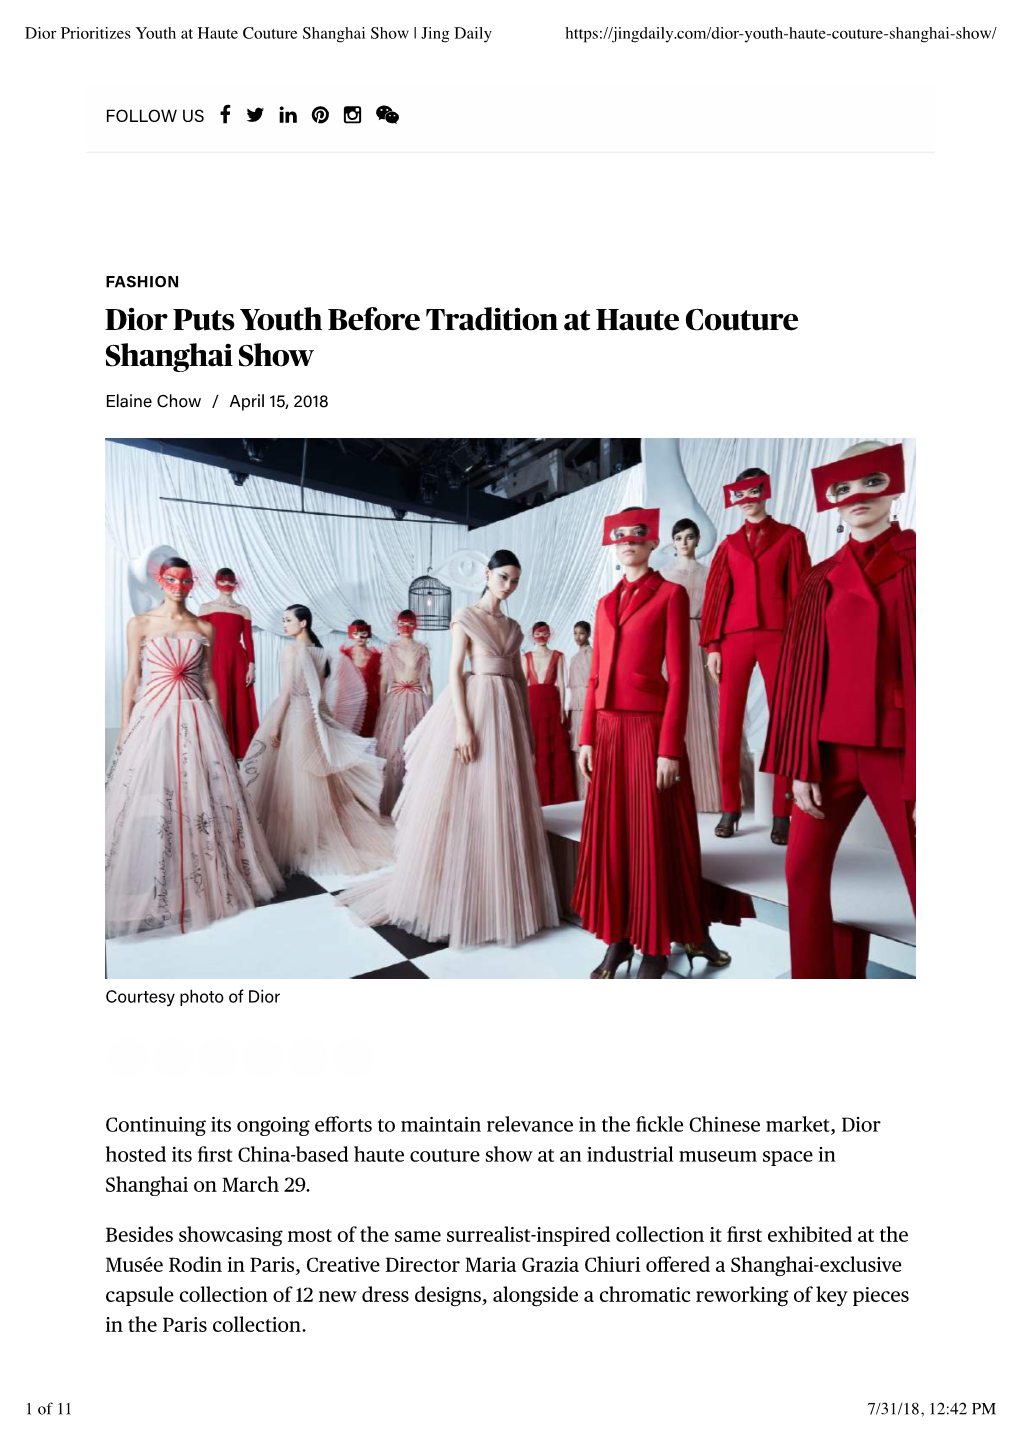 Dior Puts Youth Before Tradition at Haute Couture Shanghai Show